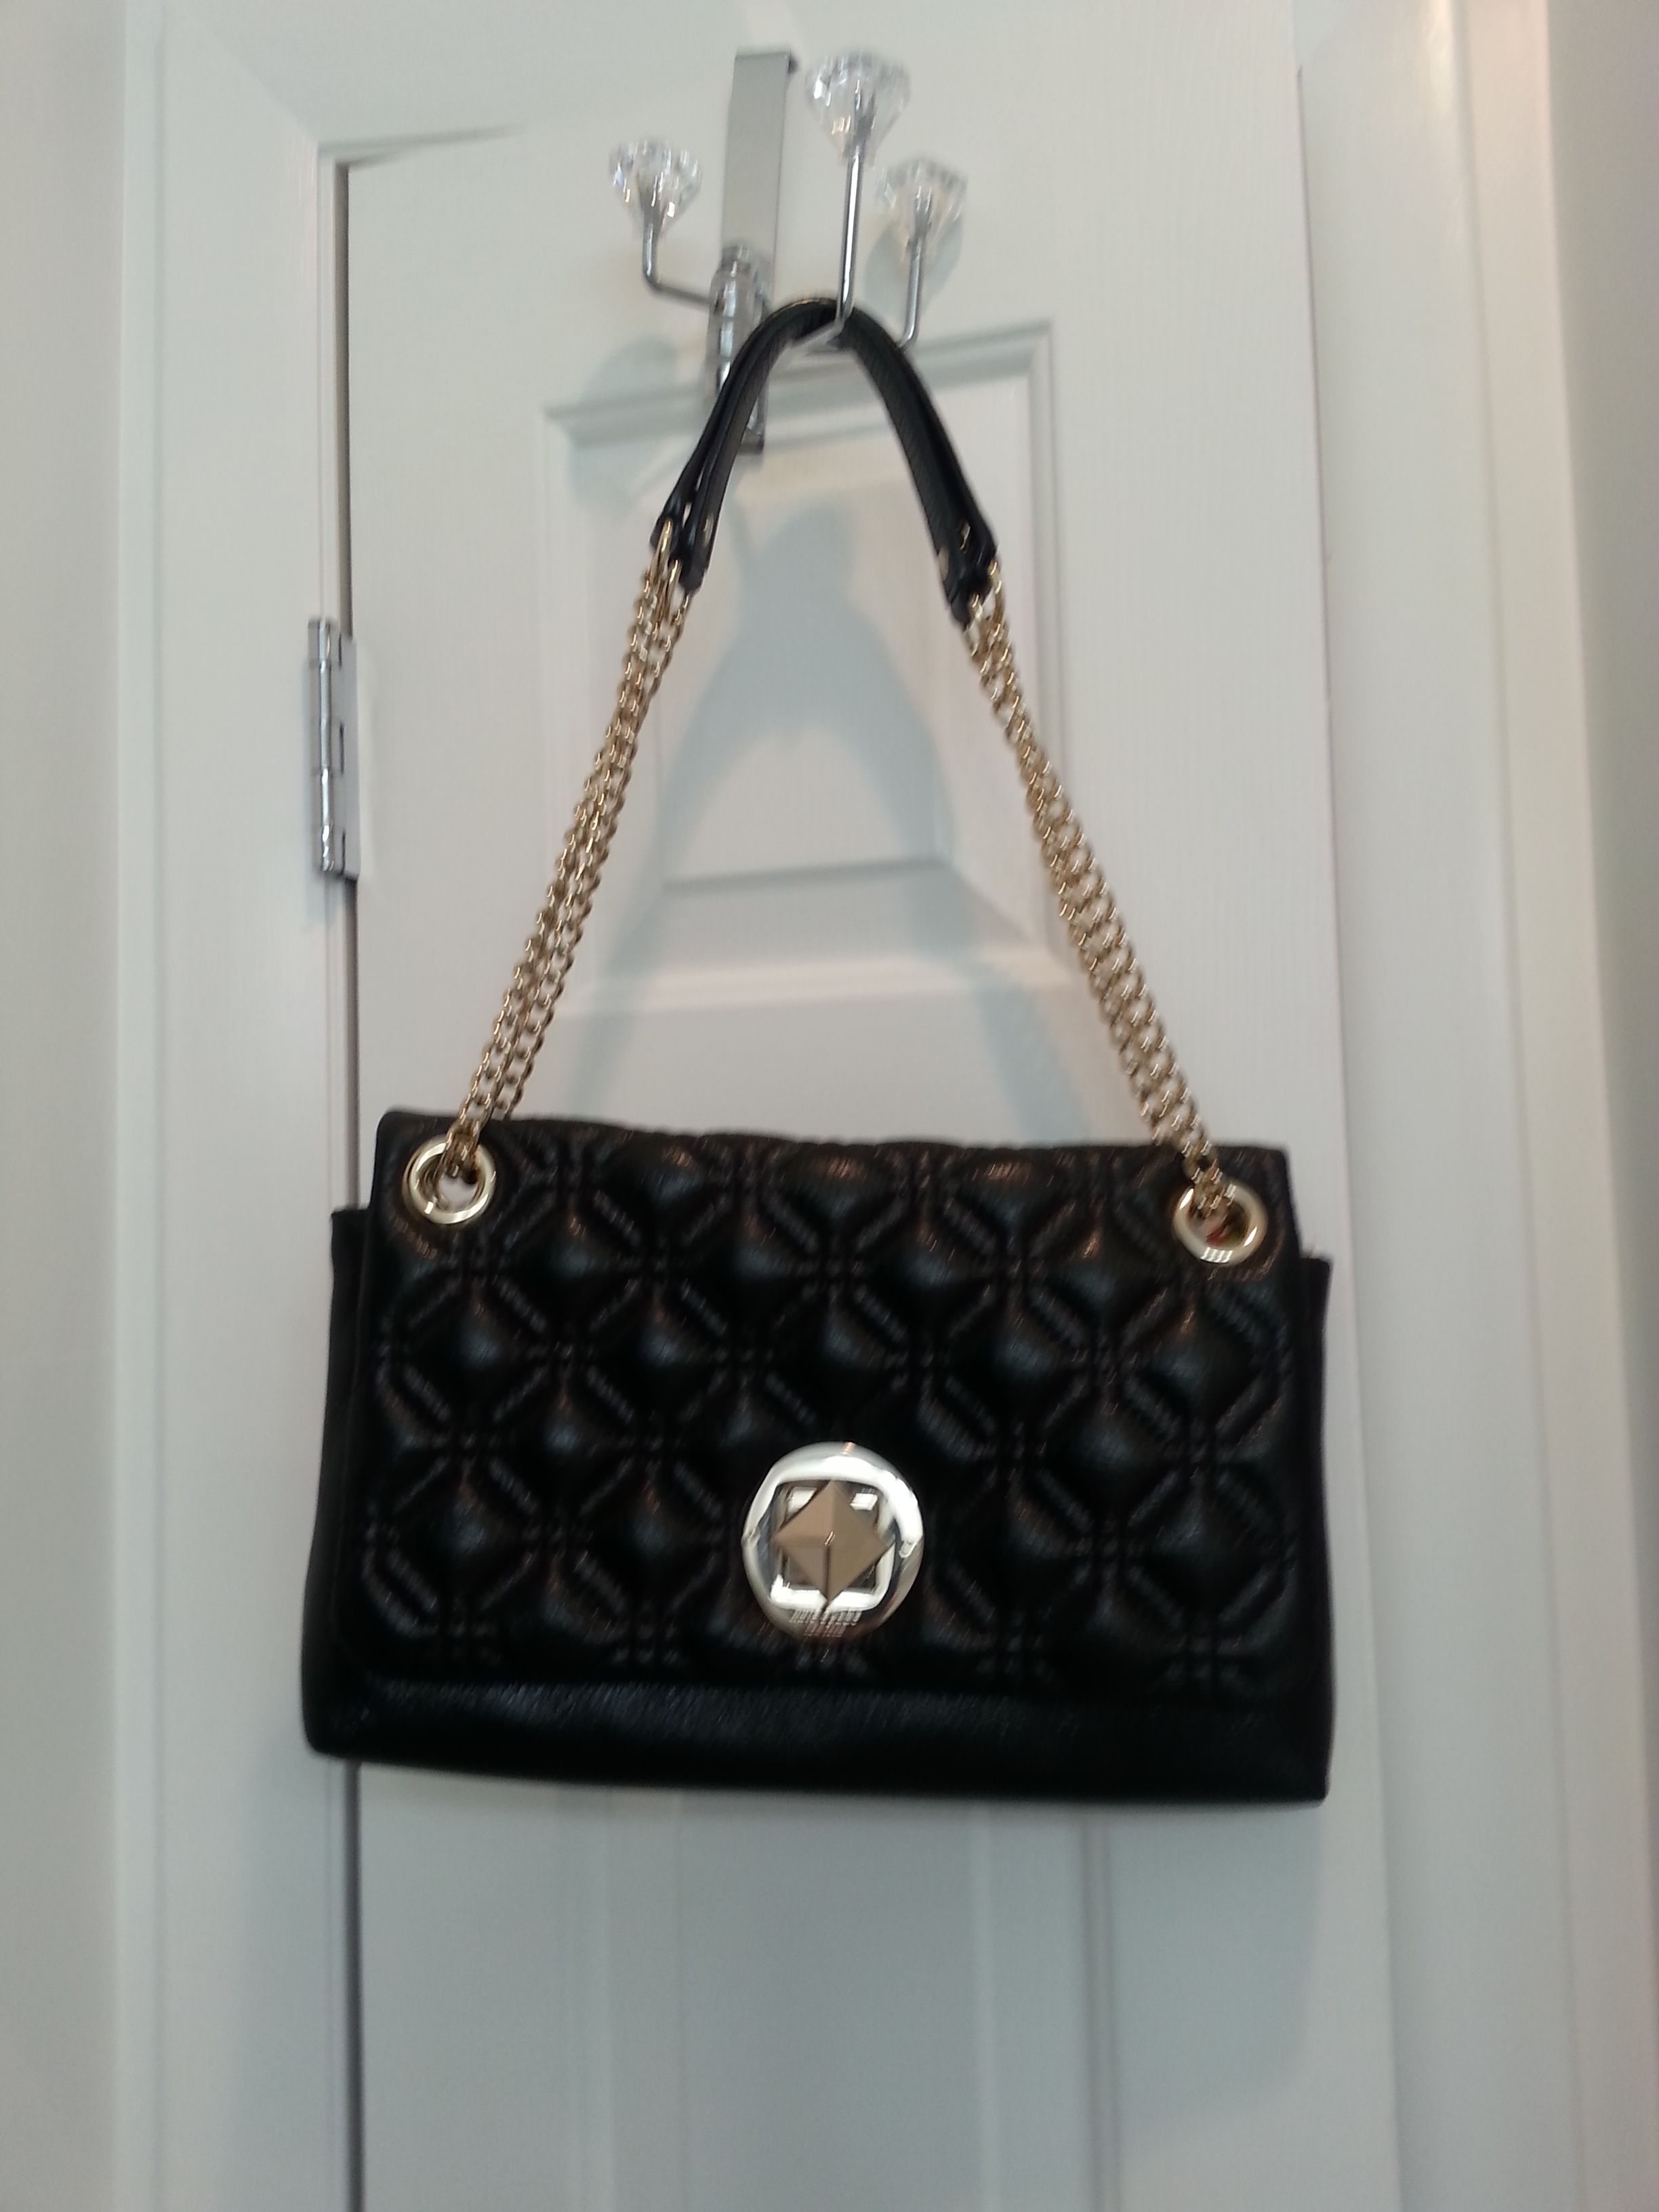 Kate Spade Quilted Black Leather bag